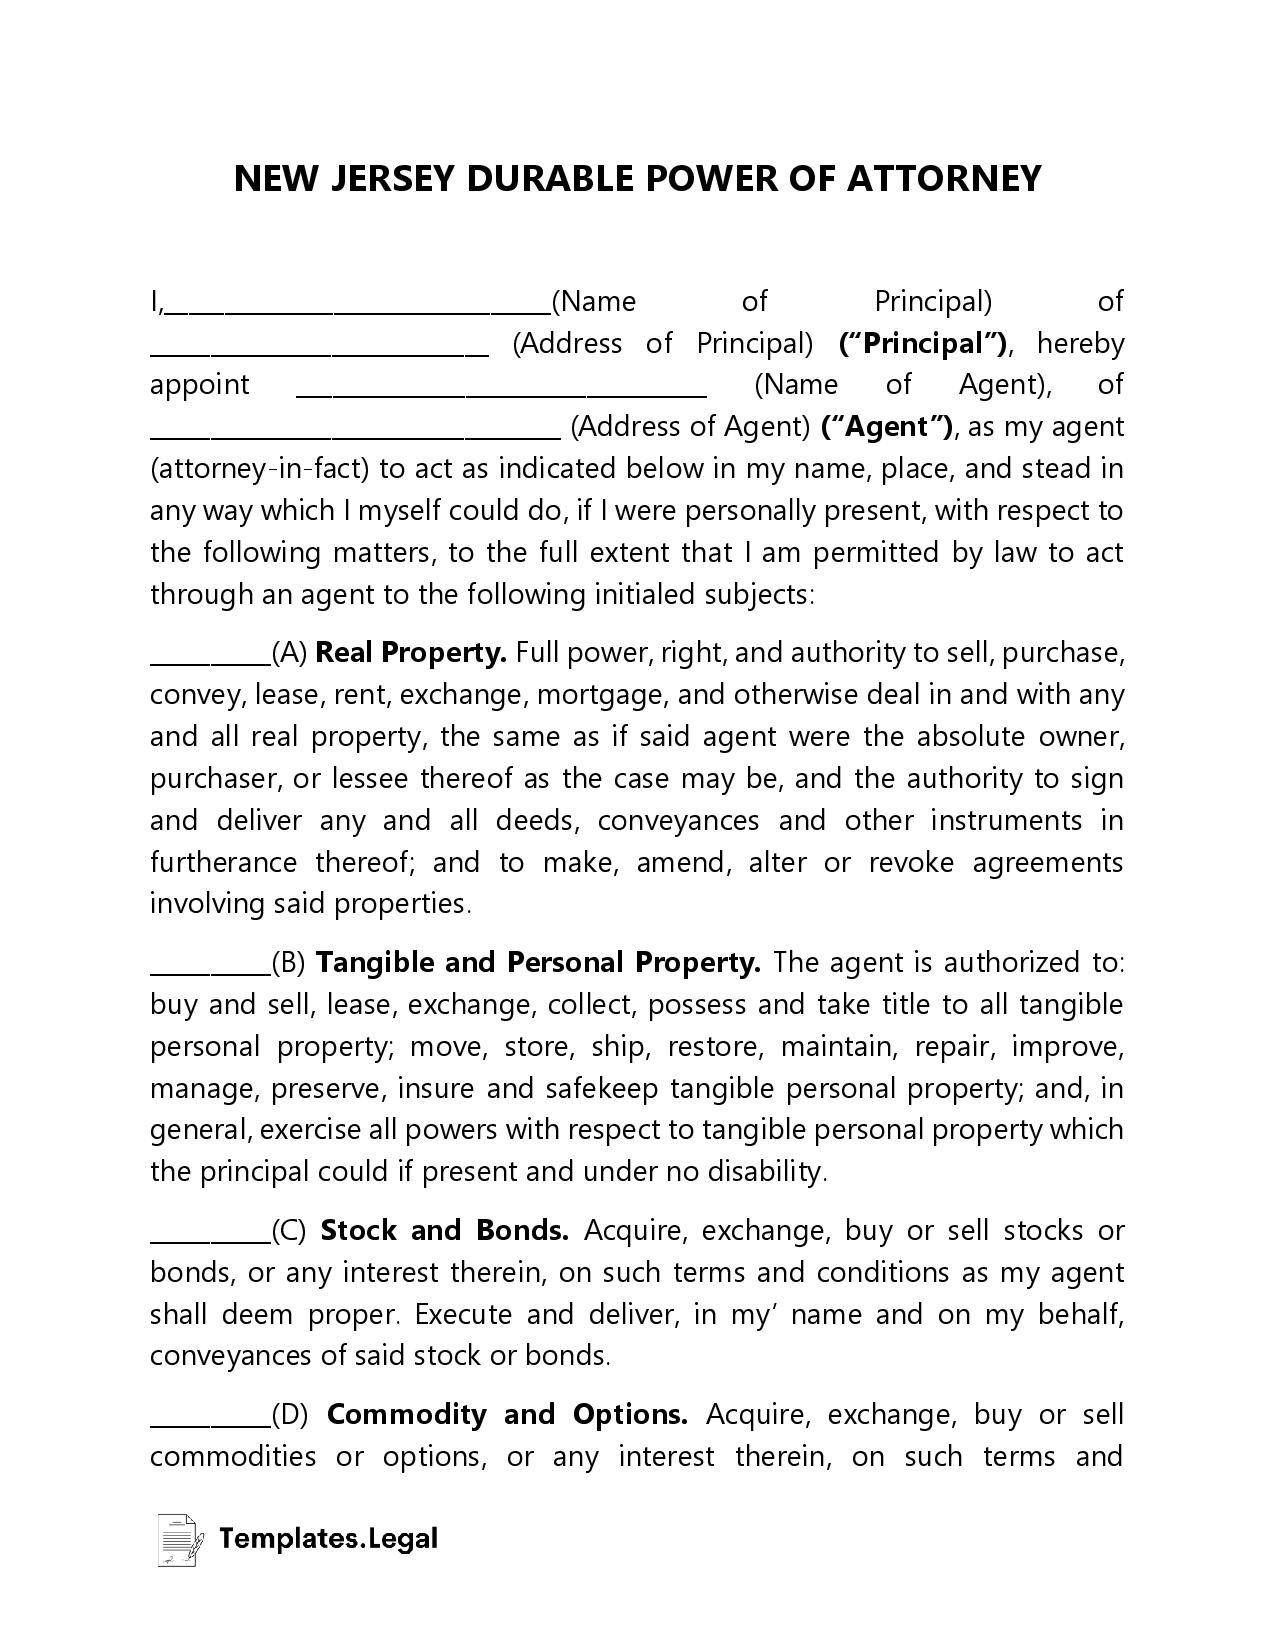 New Jersey Durable Power of Attorney - Templates.Legal